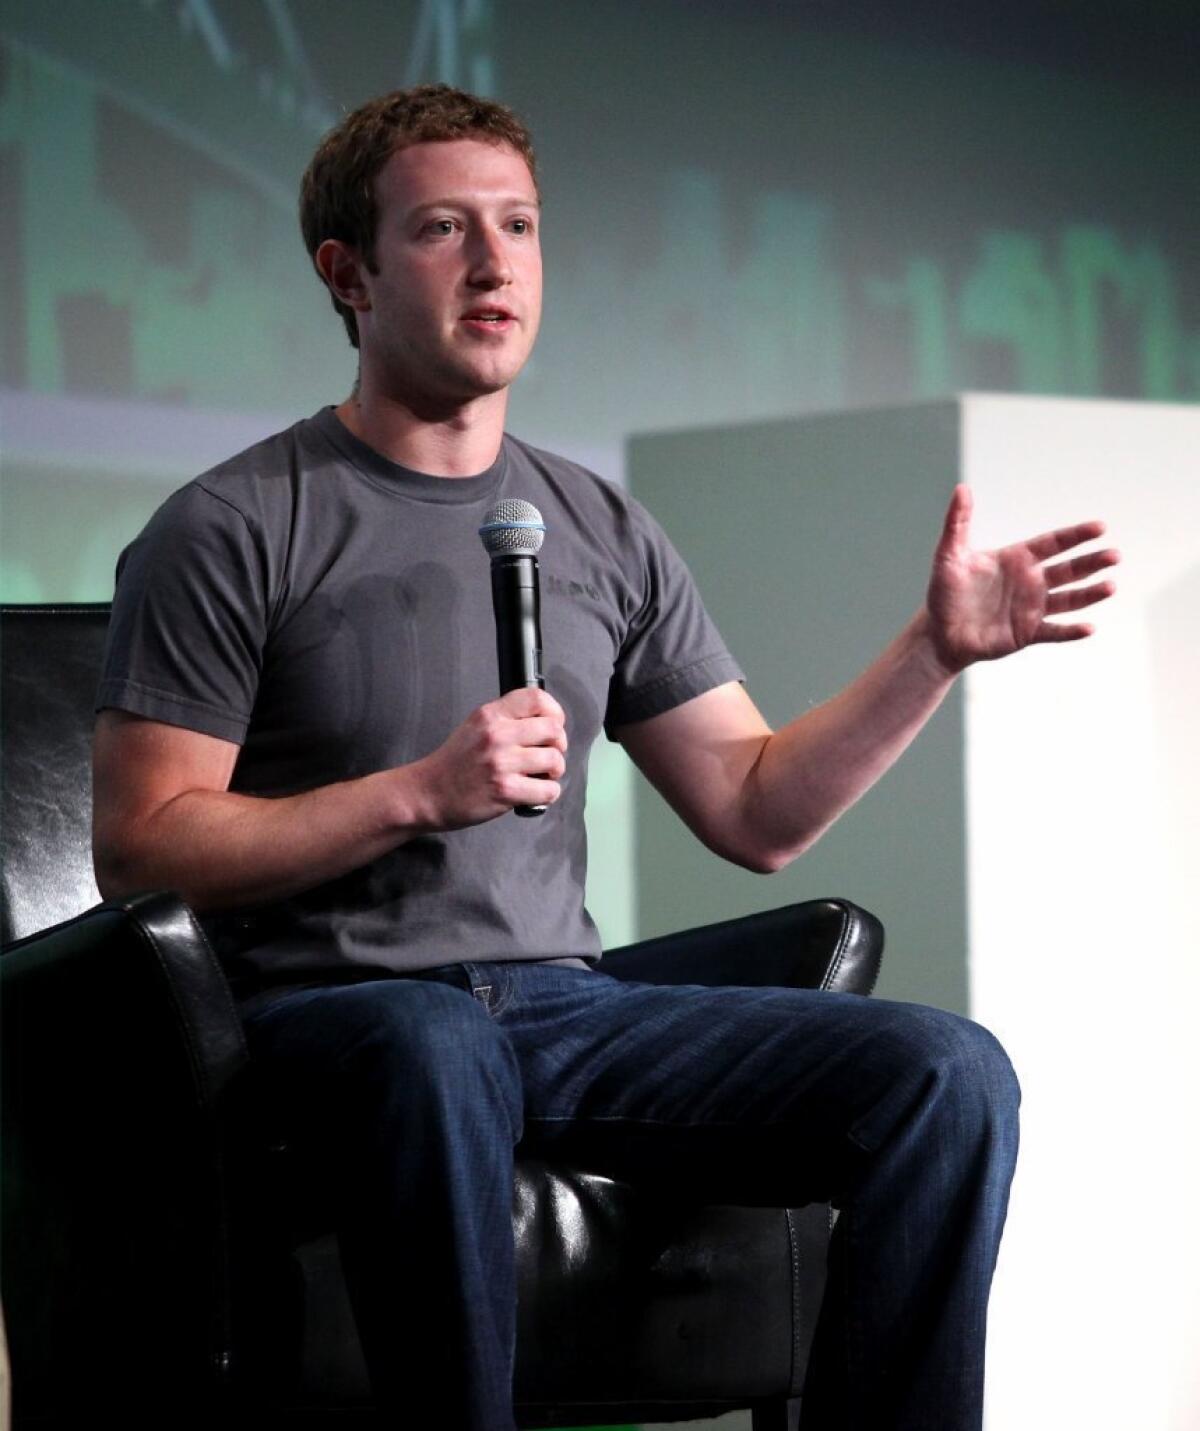 Facebook Chief Executive Mark Zuckerberg speaks at the TechCrunch Disrupt conference in San Francisco in September.